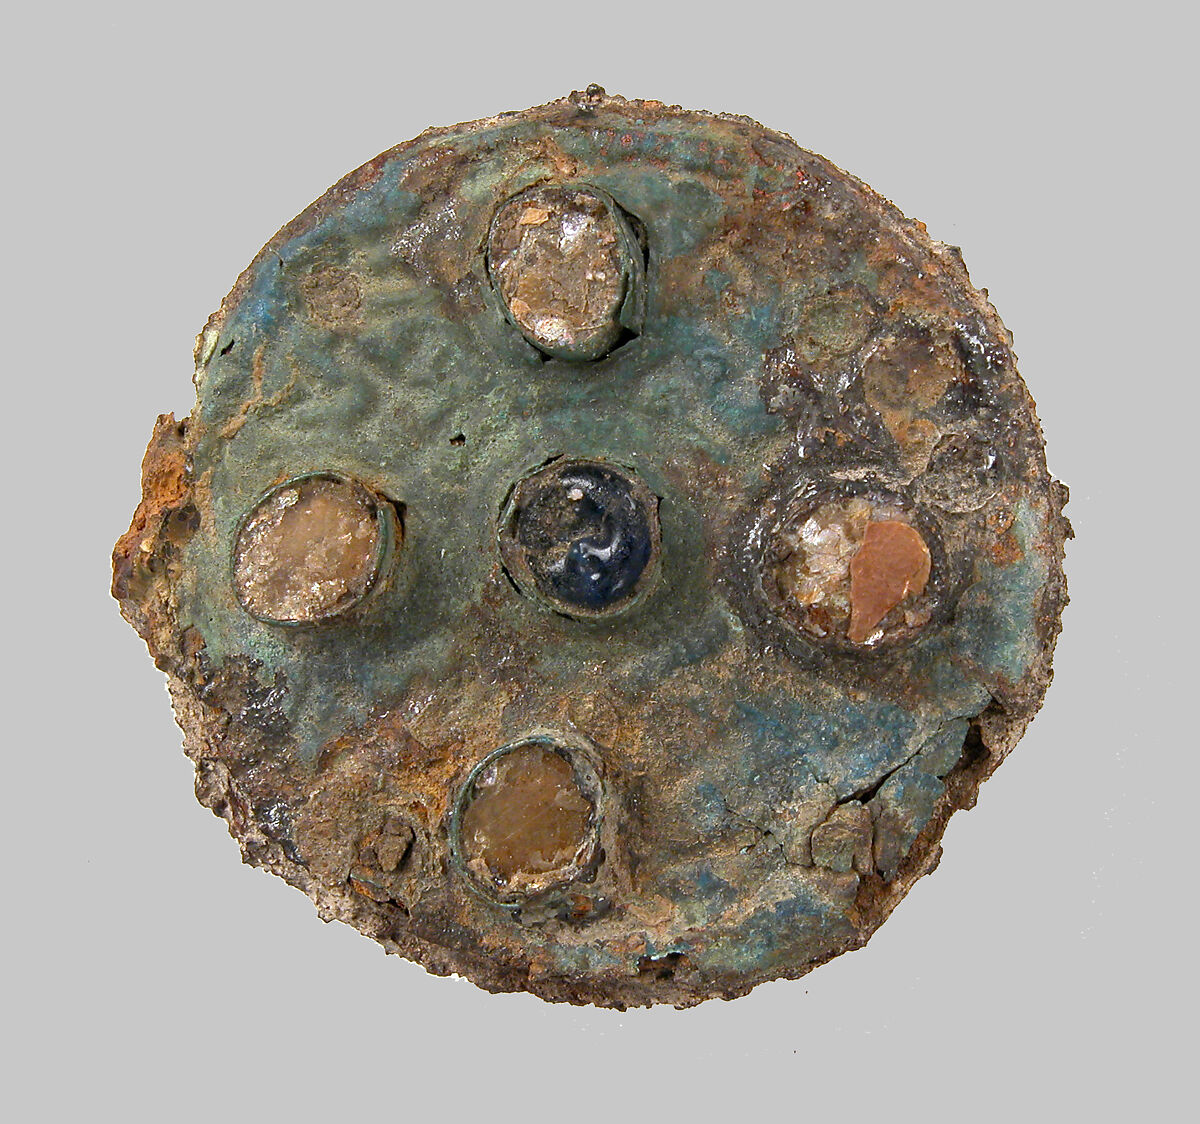 Disk Brooch, Copper alloy, iron core, glass paste or stone, evidence of gold foil, Frankish 